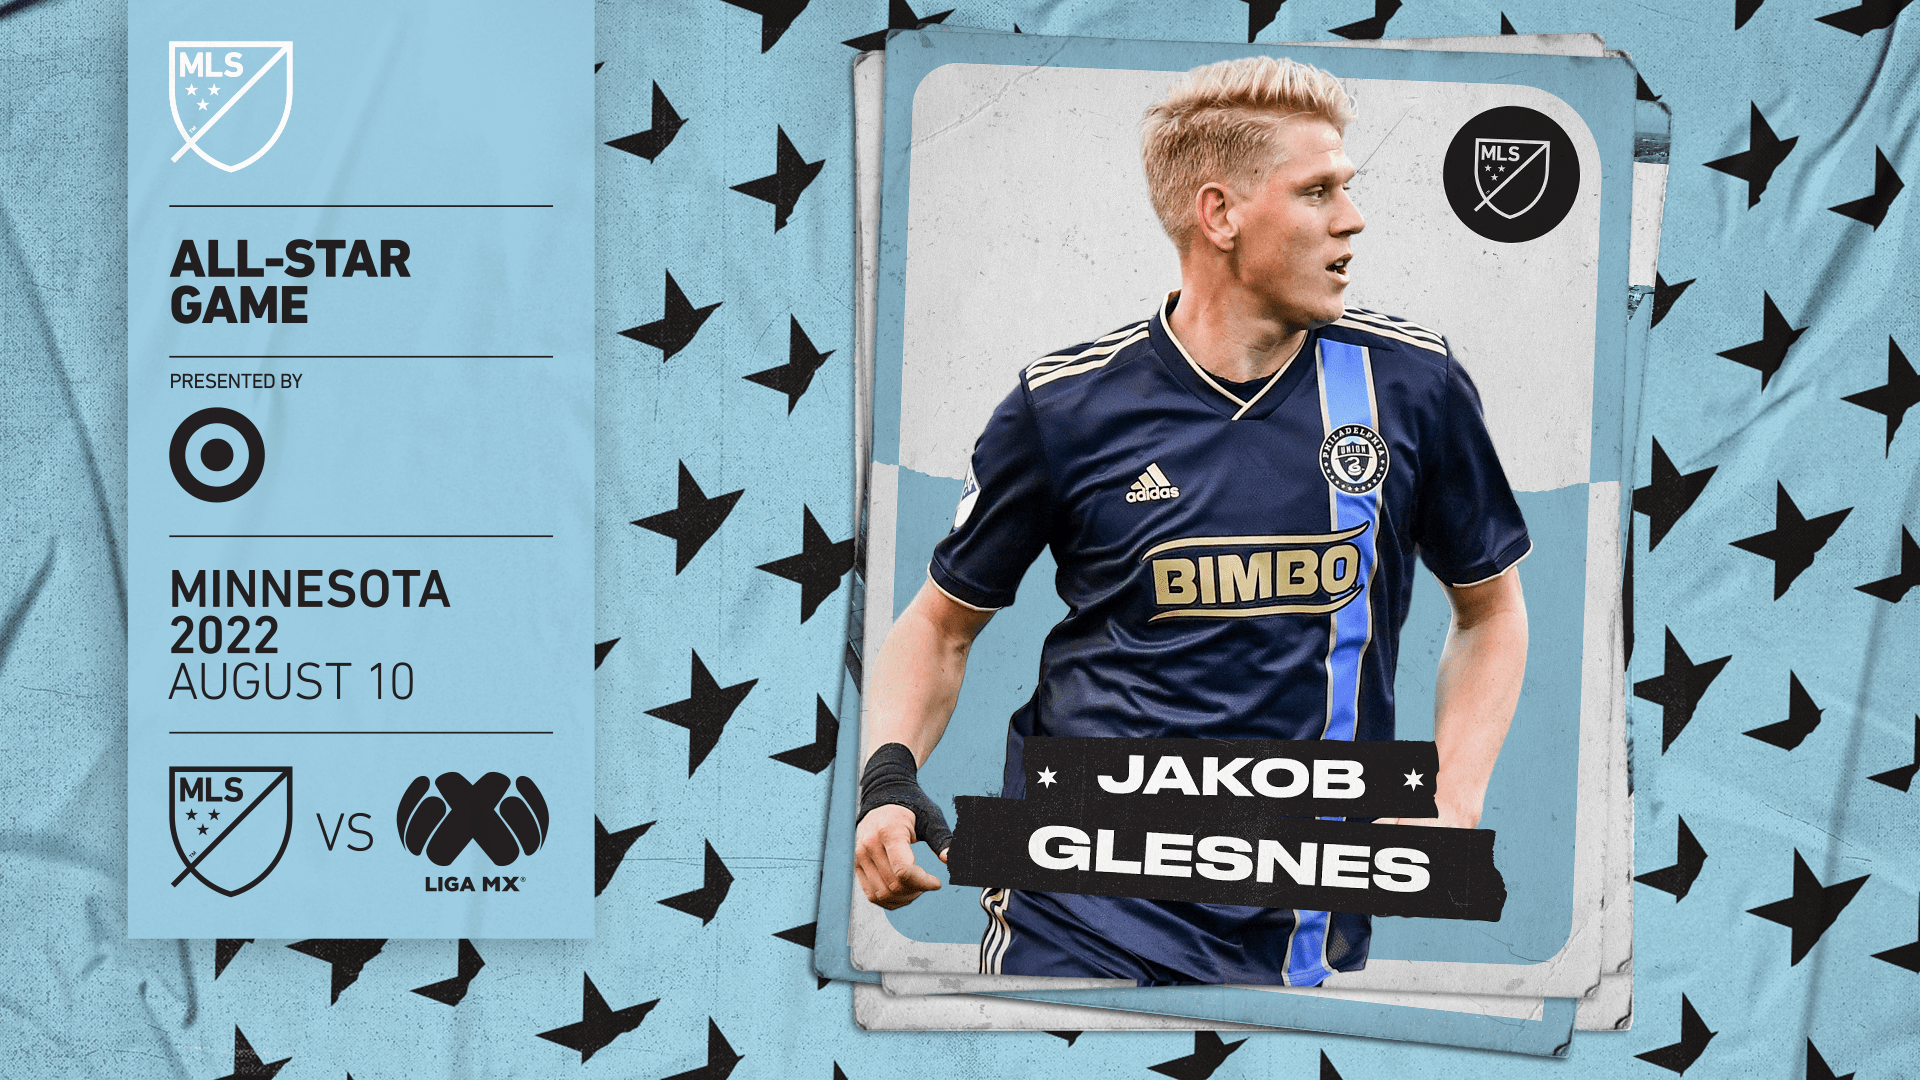 Jakob Glesnes added to MLS All-Star Game roster as Alexander Callens' replacement